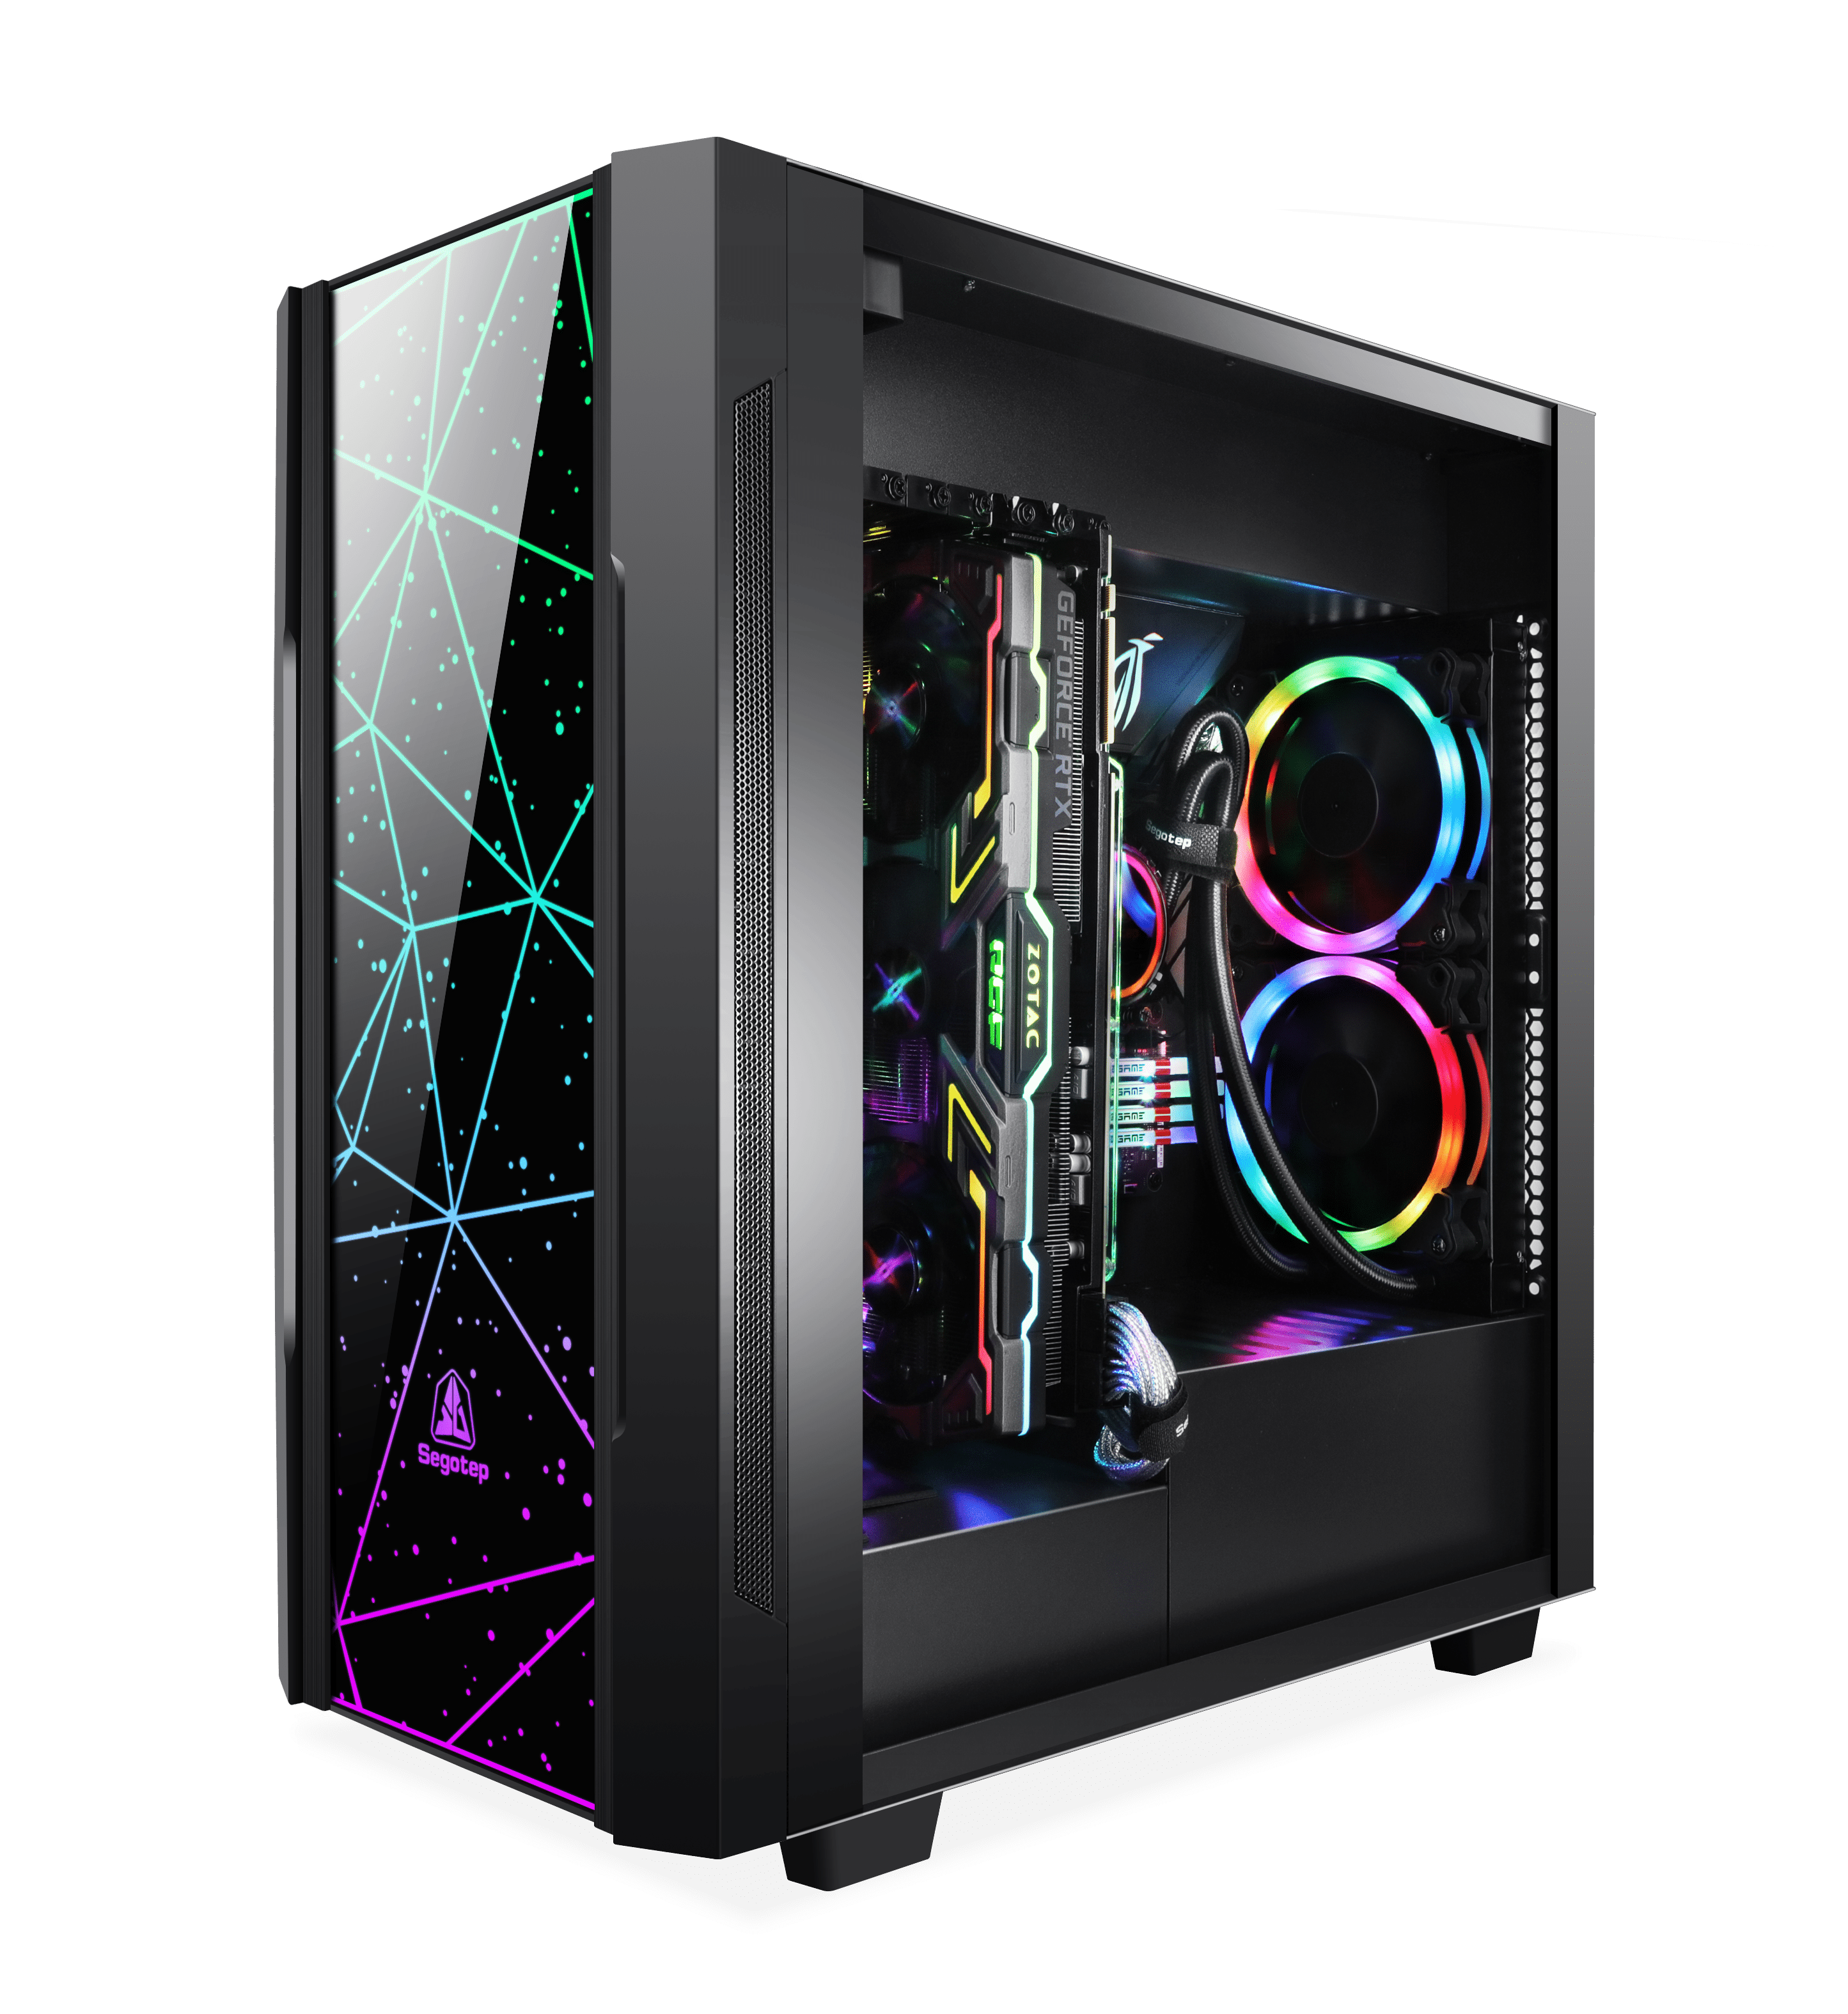 Segotep Phoenix ATX Black Mid Tower PC Gaming Computer Case USB 3.0 Ports/Graphics Card Vertical Mounting with Tempered Glass & RGB Front Panel